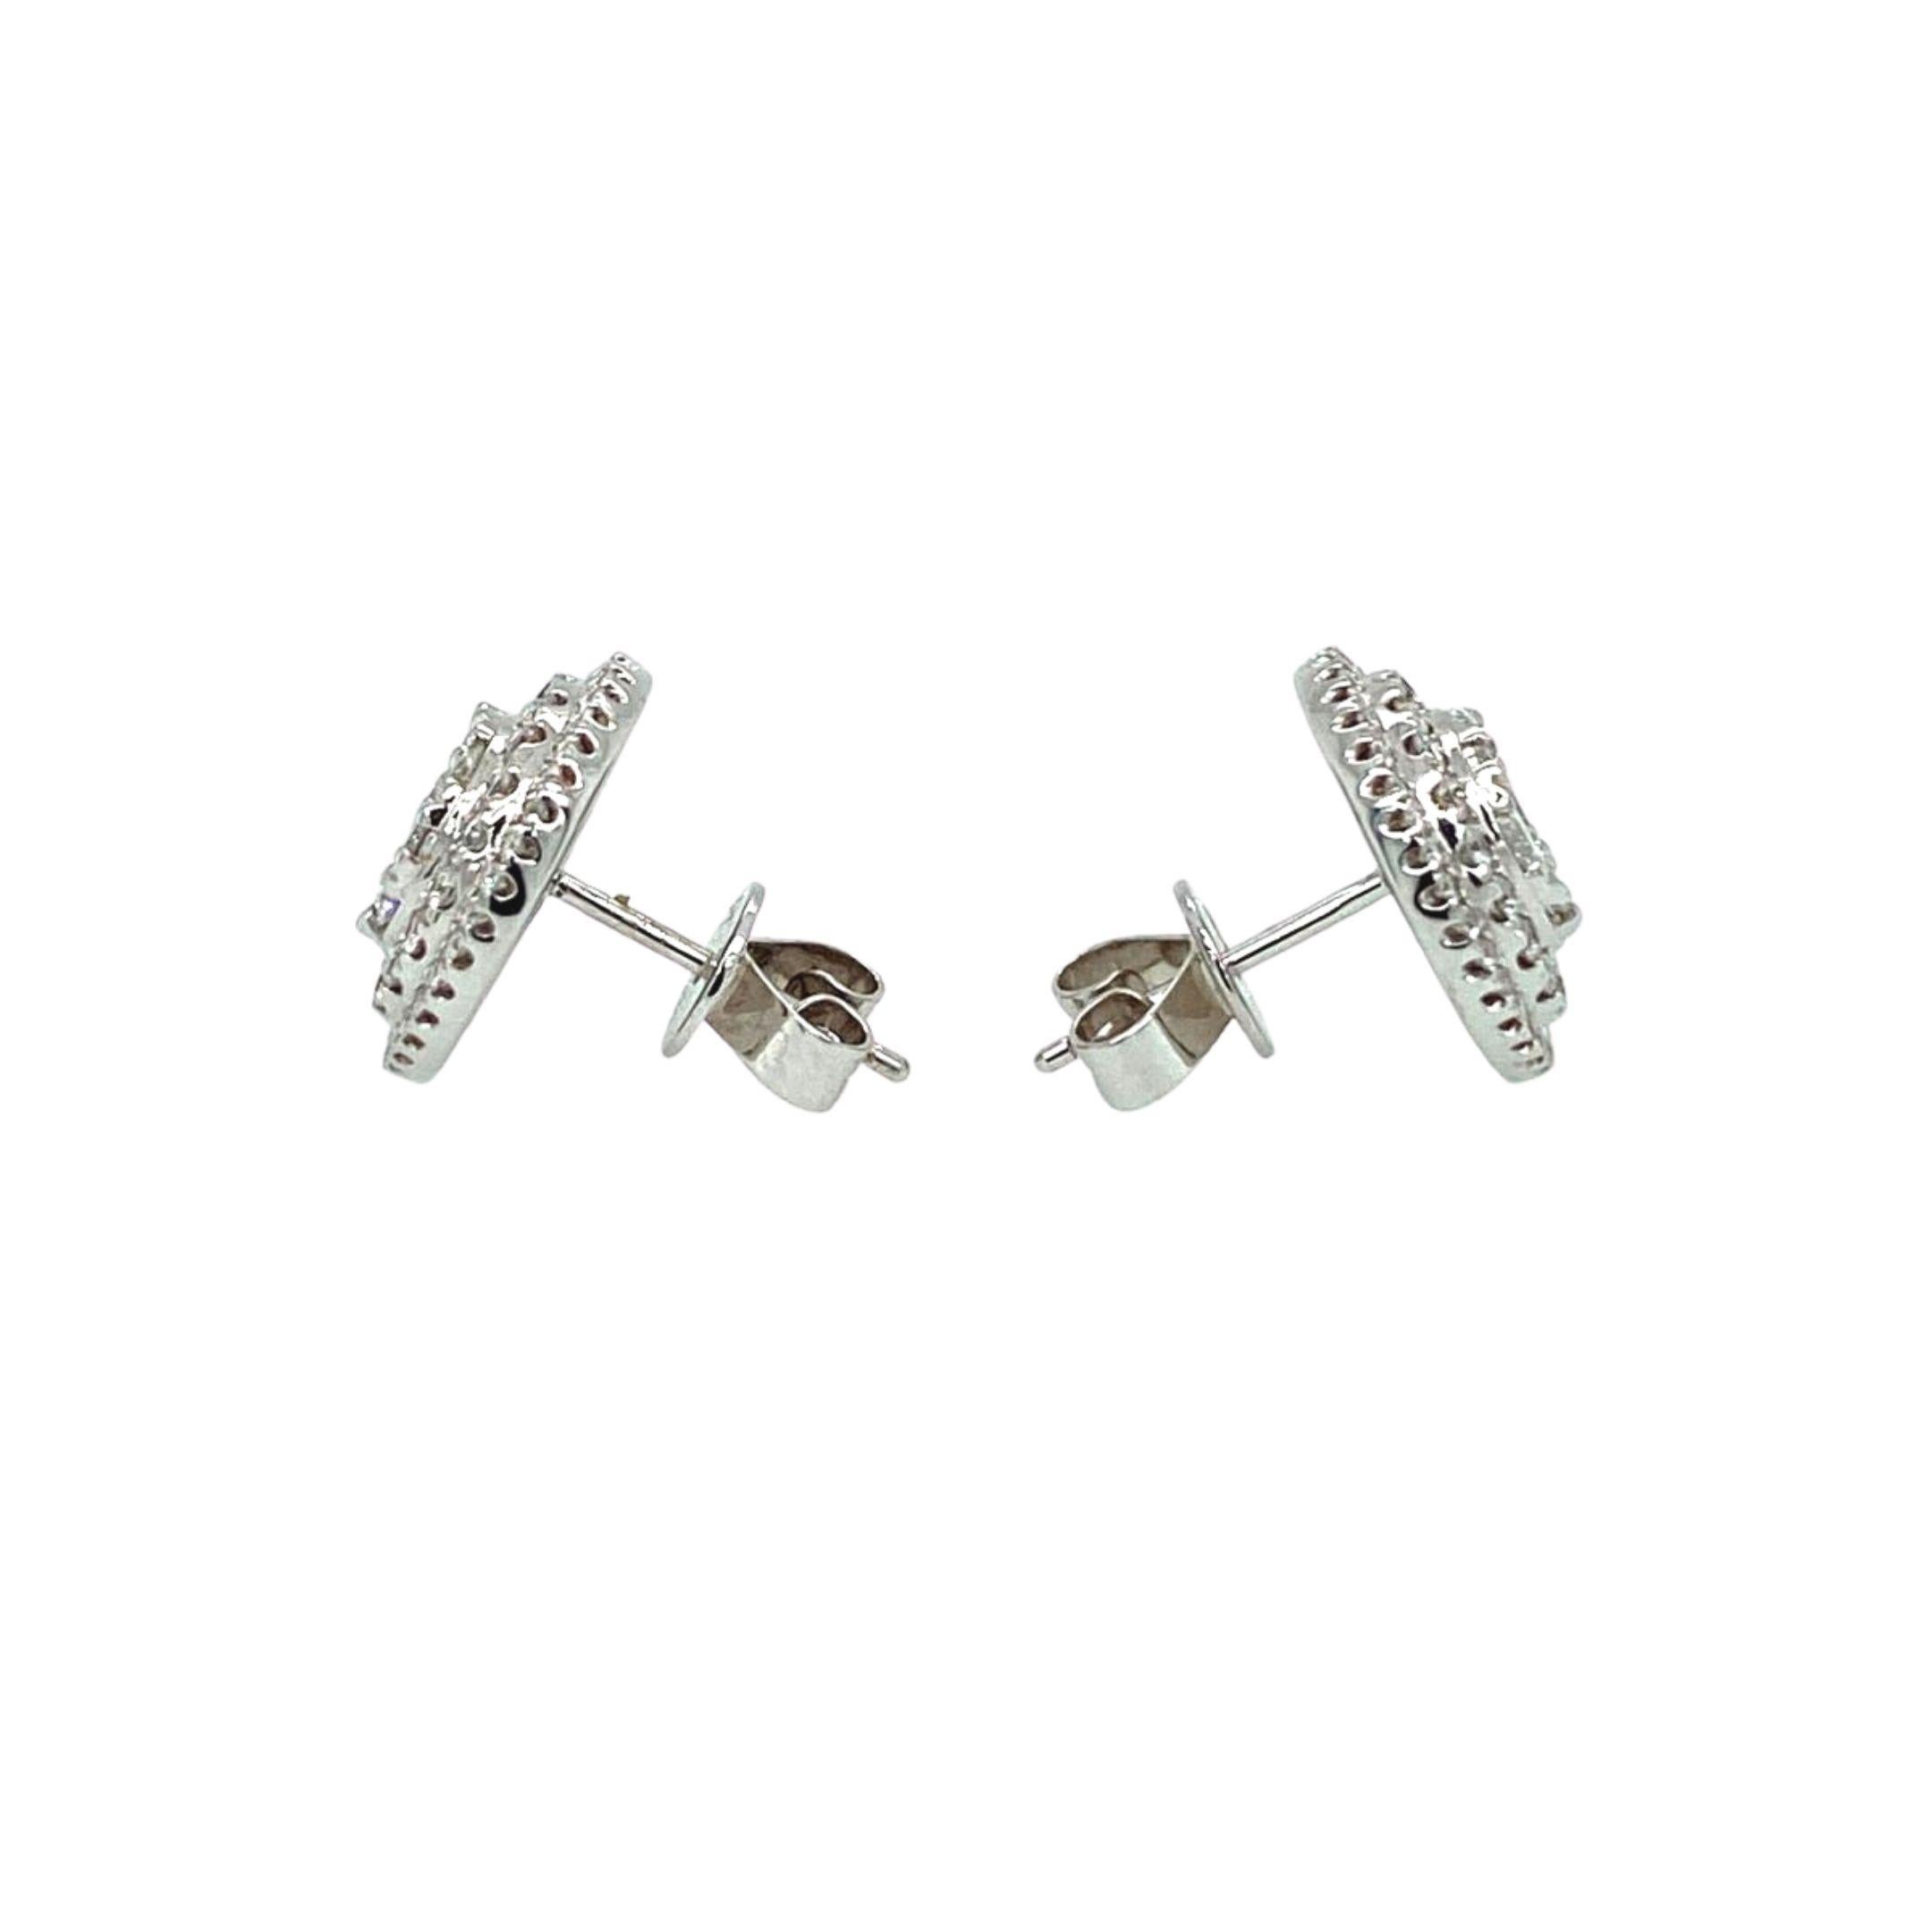 Diamond Pavee Stud Earrings made with natural brilliant cut diamonds. Total Weight: 1.23 carats. Set on 18 karat white gold, push back setting.